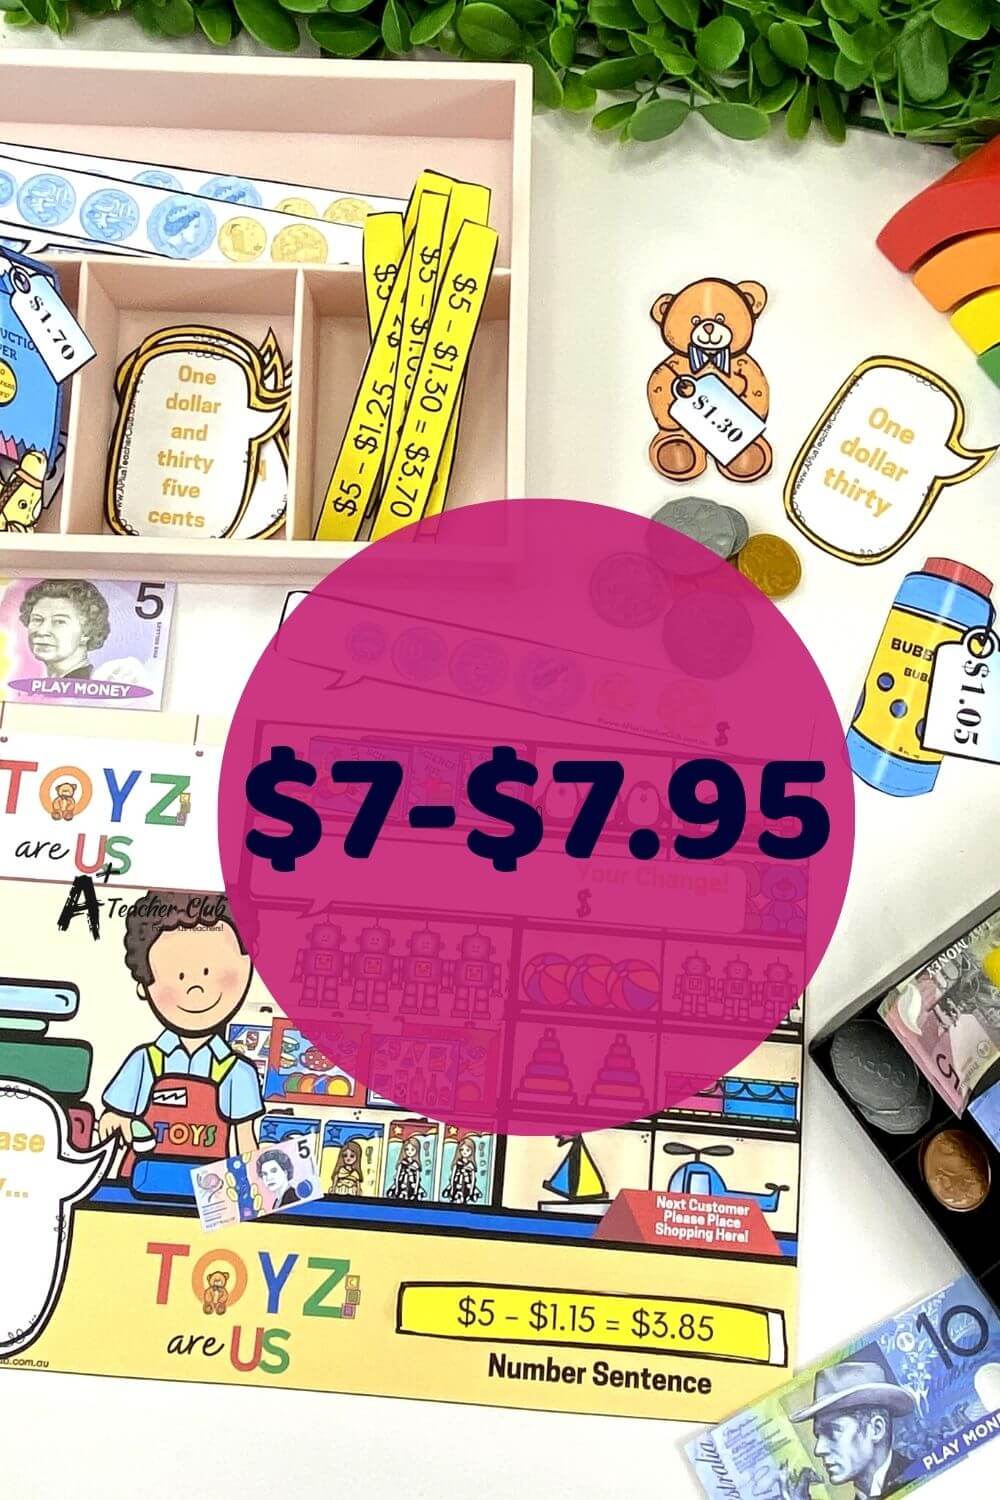 Christmas Maths Toy Shop Money & Change Game ($7-$7.95)